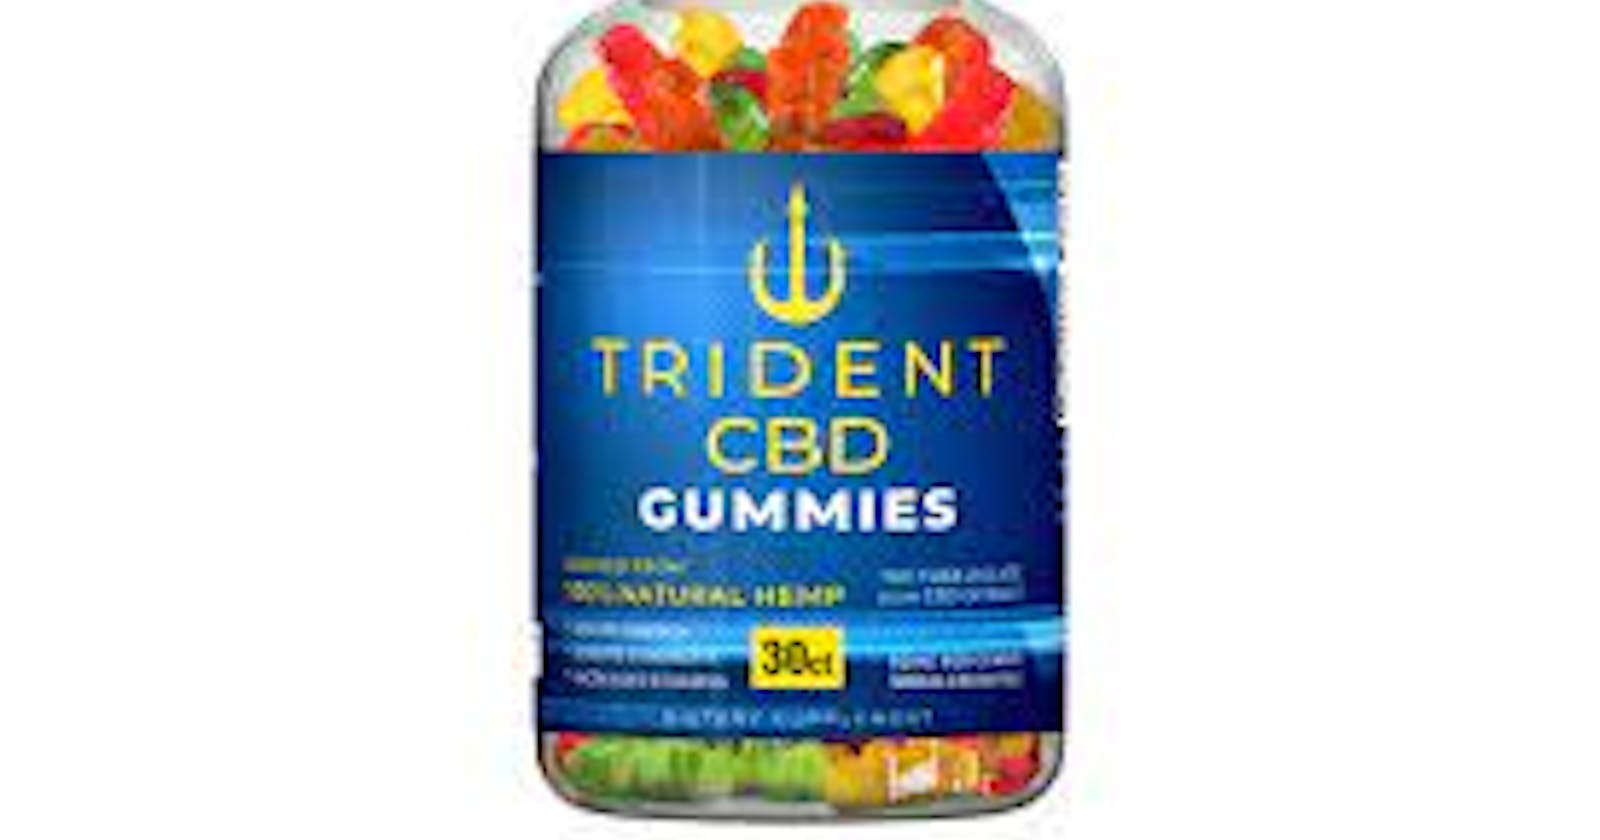 Trident cbd gummies  For Weight Loss: Risks, Side Effects And More